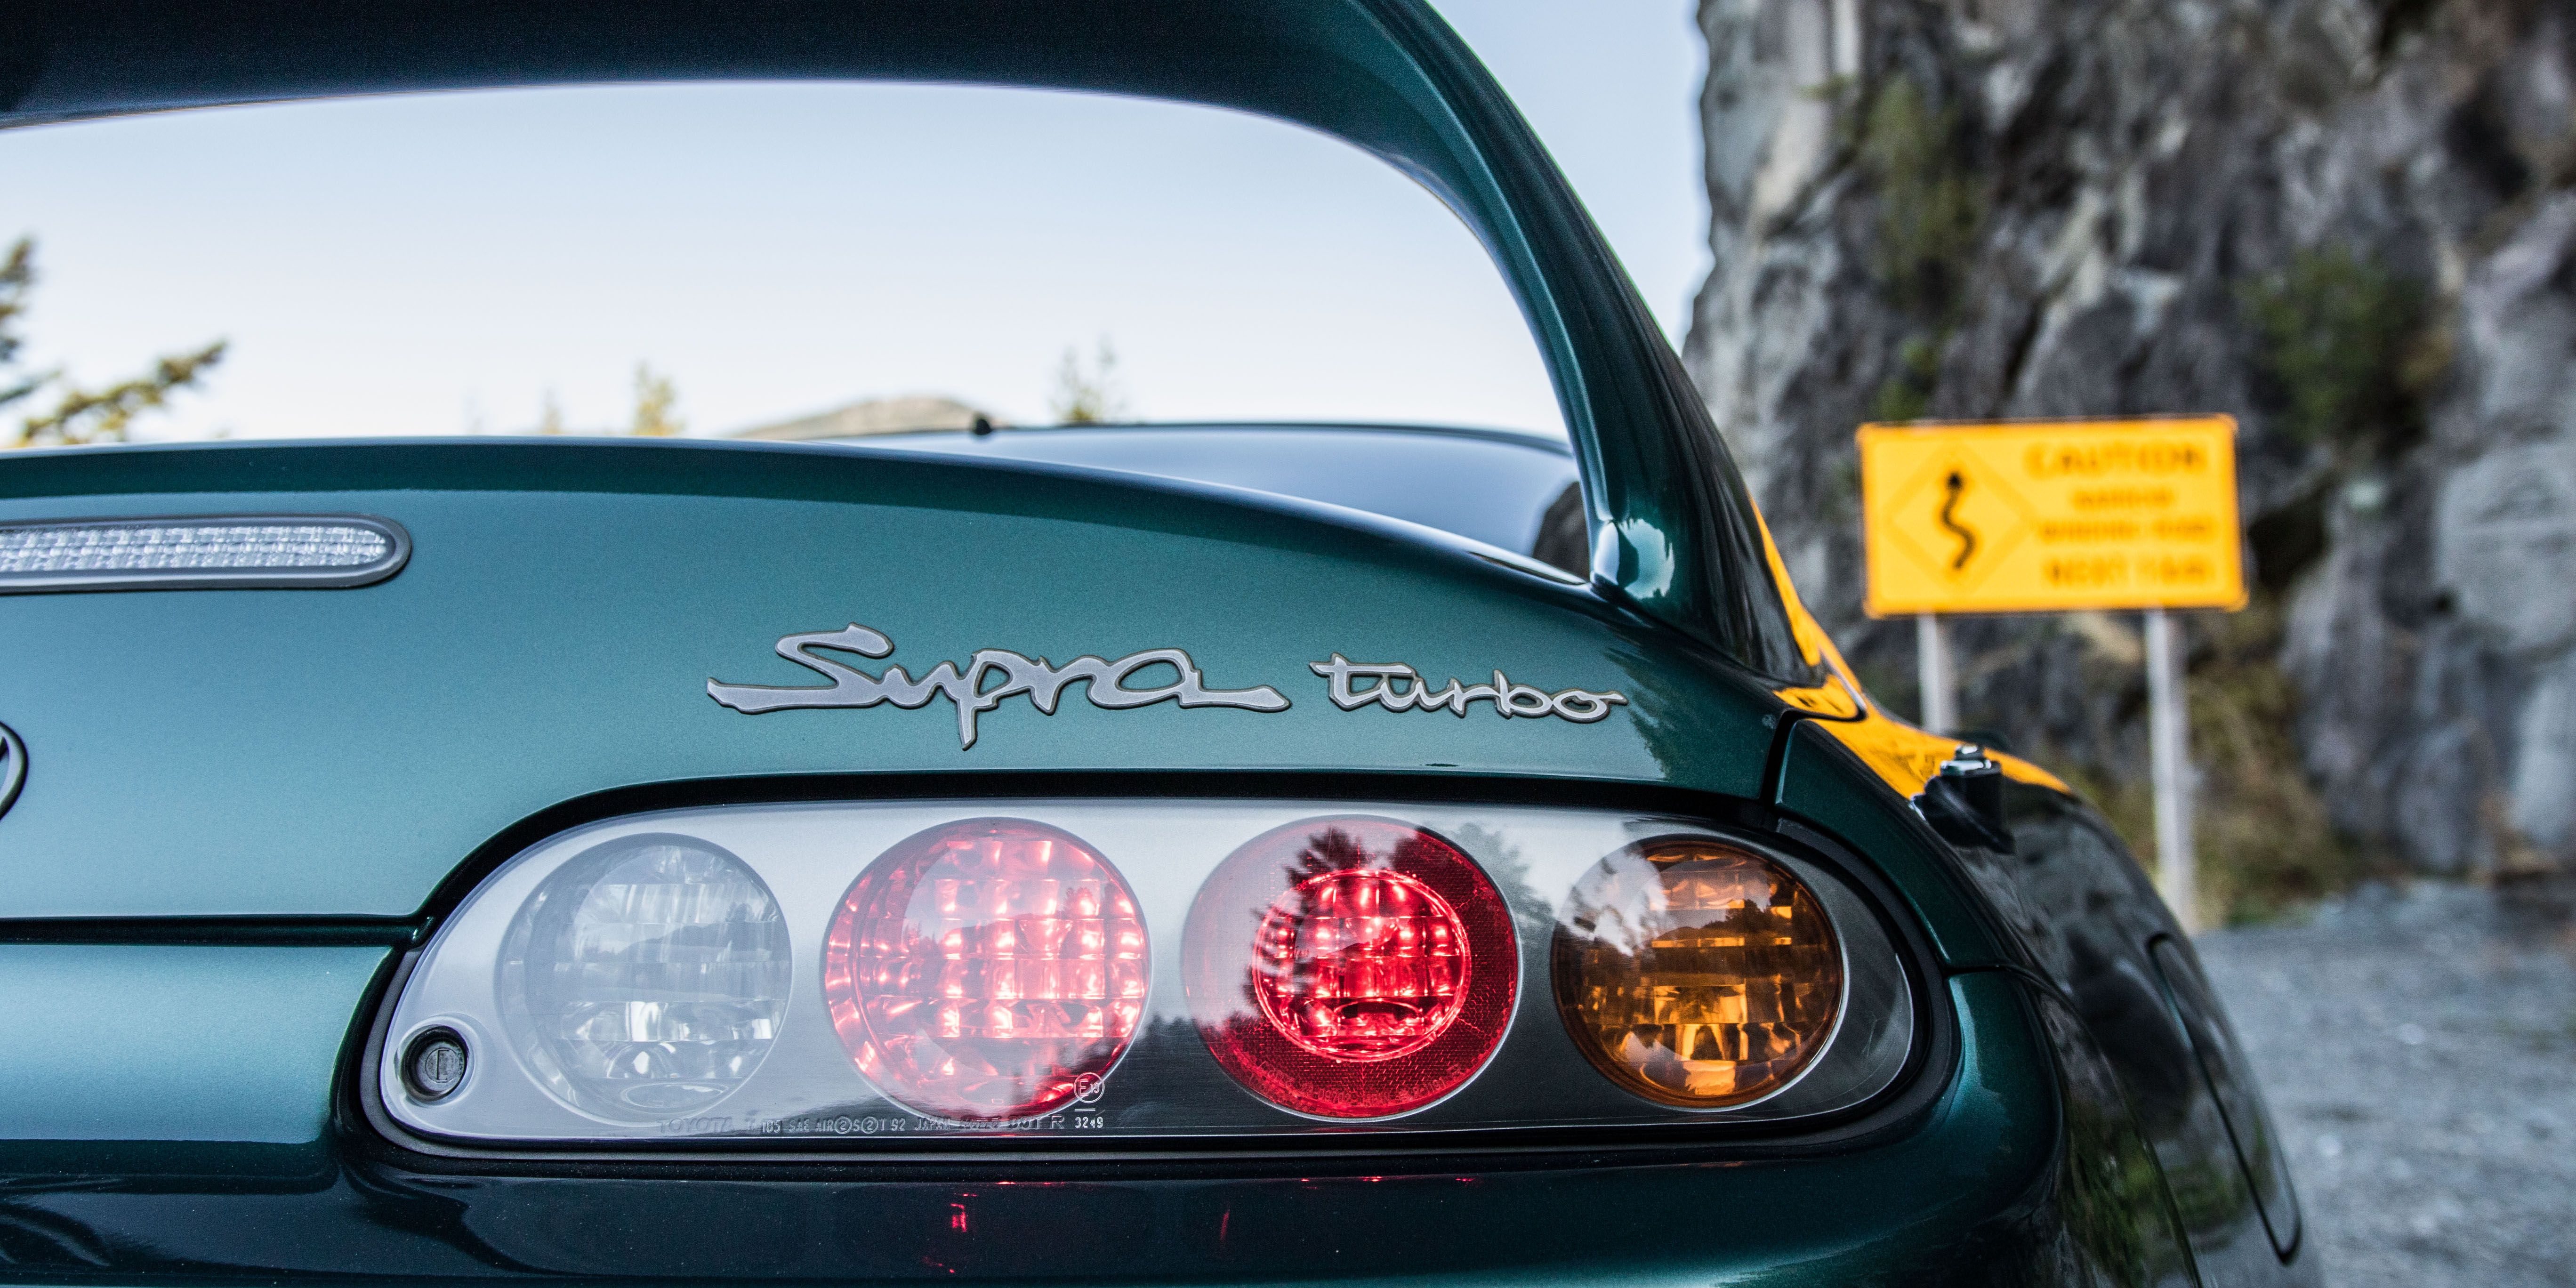 Does the Toyota Supra Deserve to Be Revered?